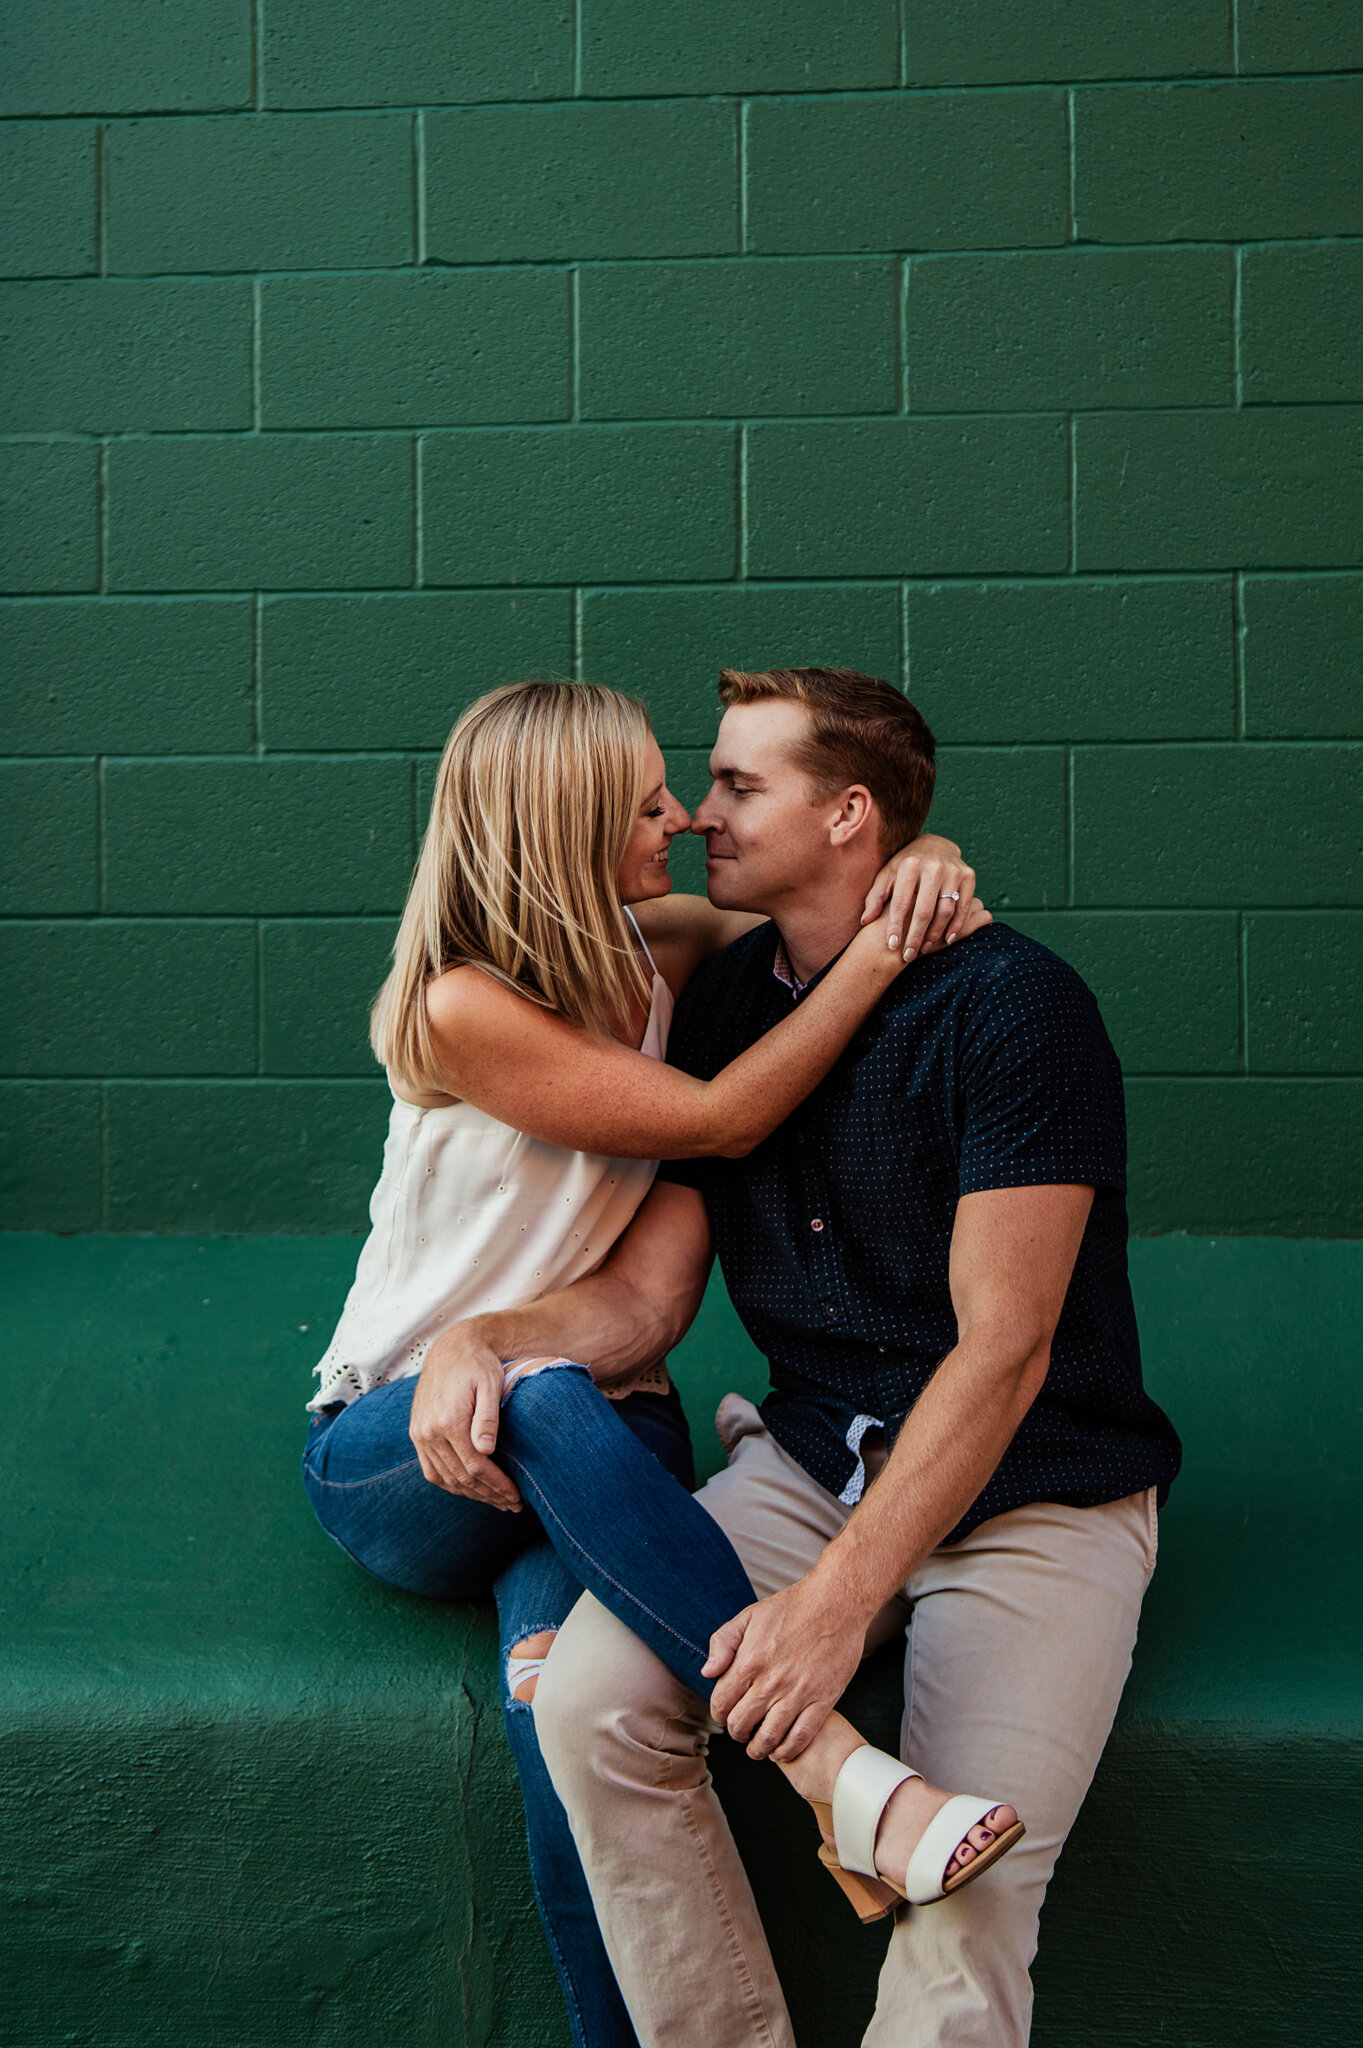 Genesee_Brew_House_High_Falls_Rochester_Engagement_Session_JILL_STUDIO_Rochester_NY_Photographer_5693.jpg